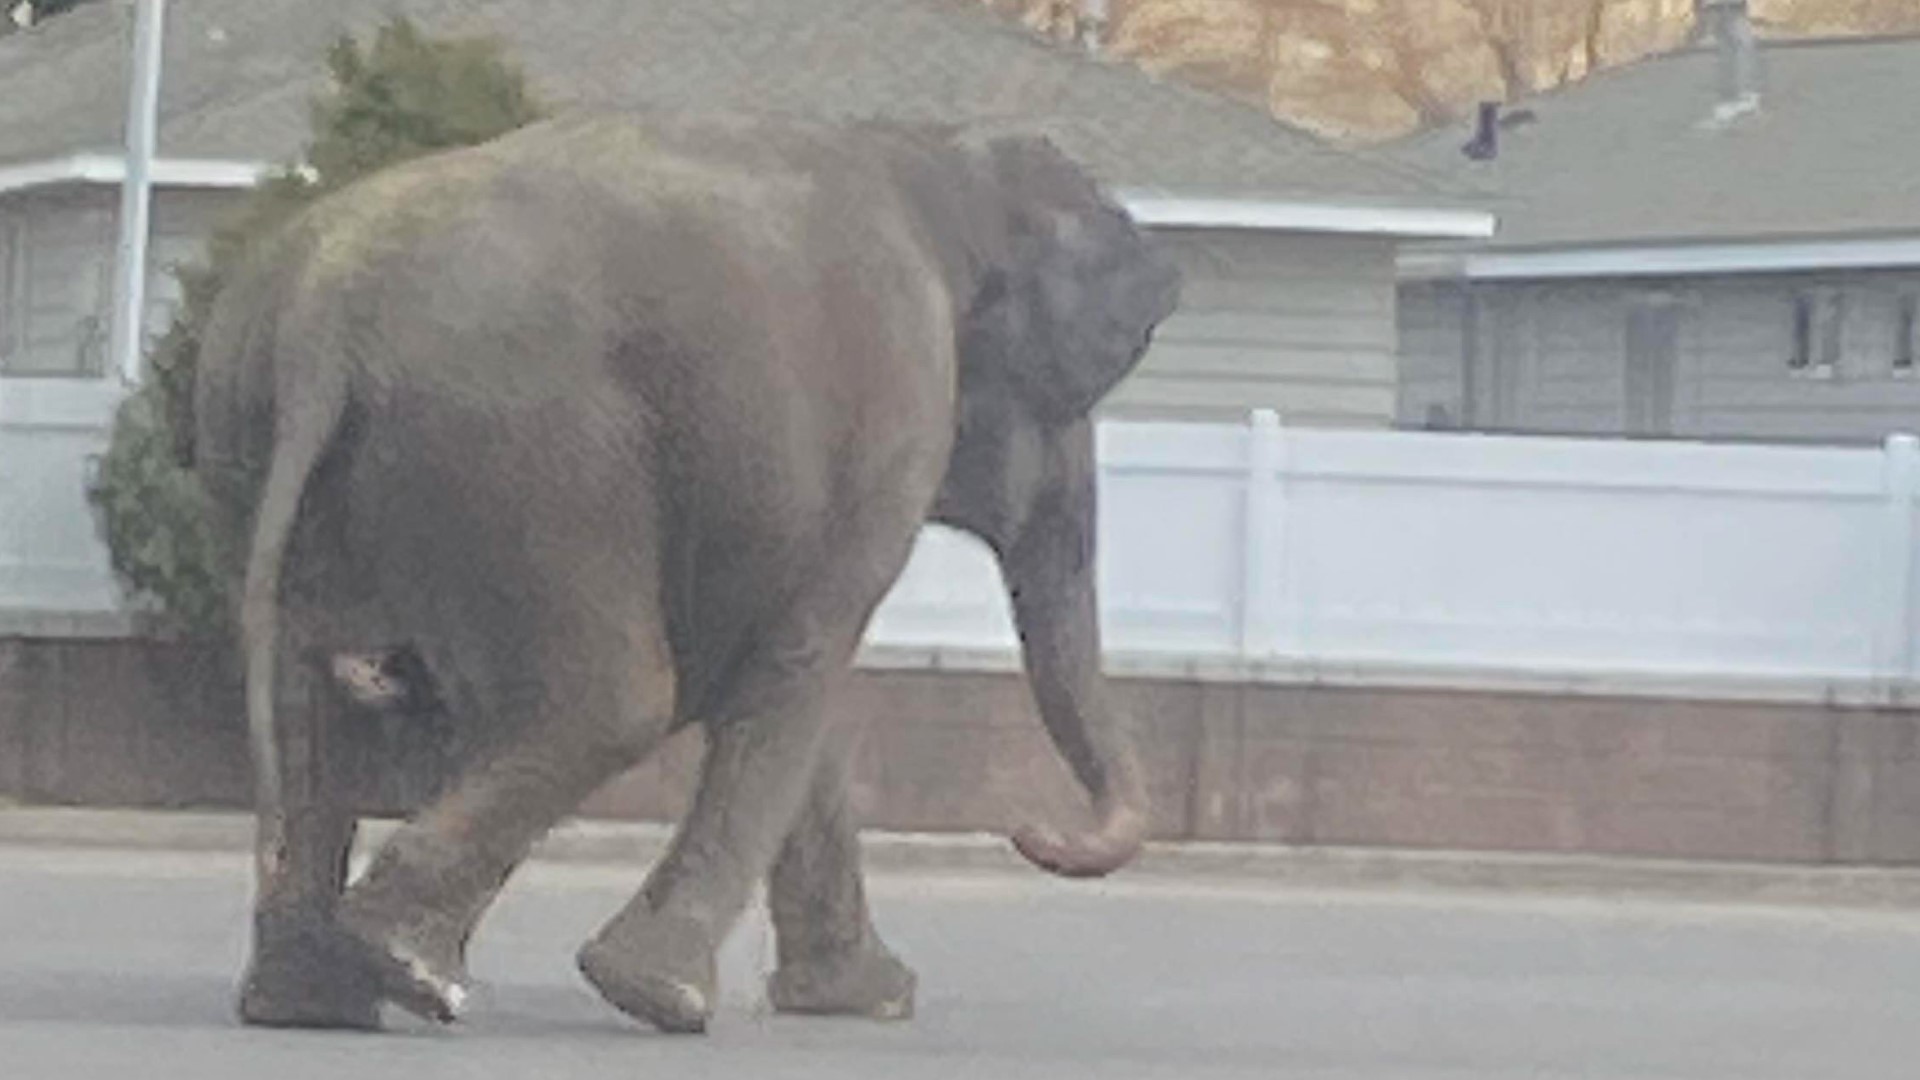 A circus elephant got loose and roamed through traffic in Butte, Montana on Tuesday